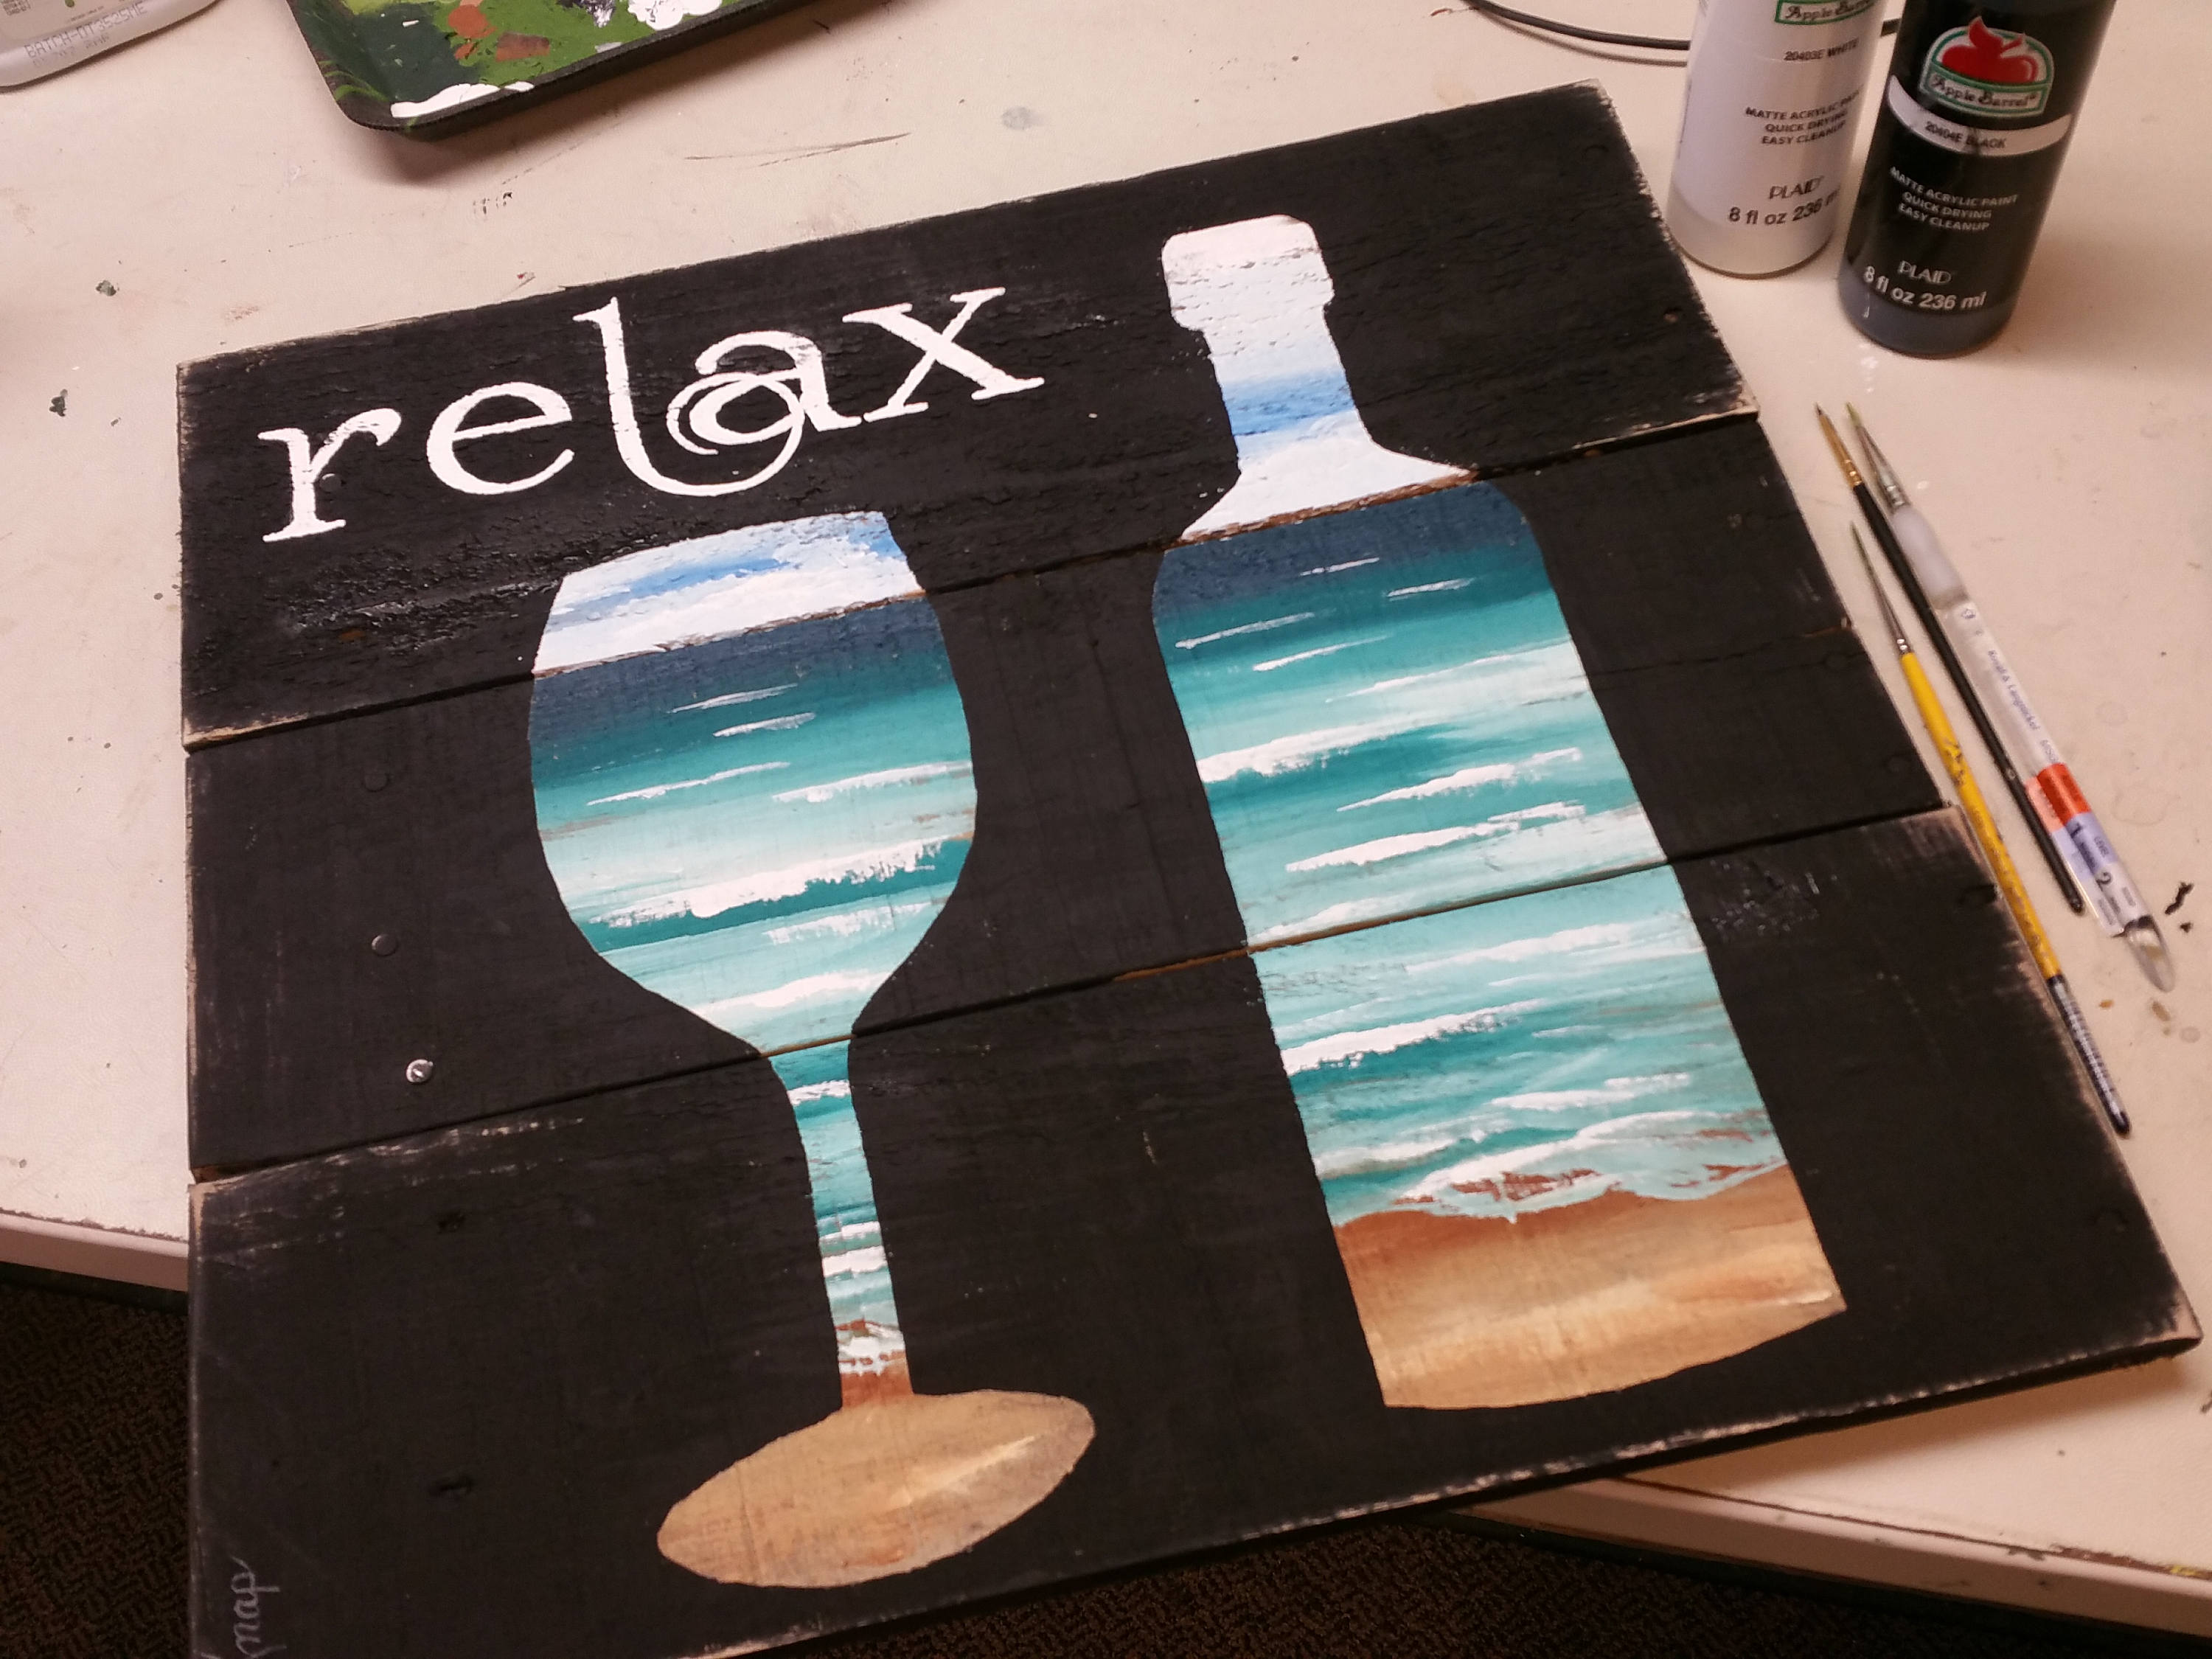 Beach & Wine word sign,  Hand painted pallet art, Relax, Nautical cottage decor